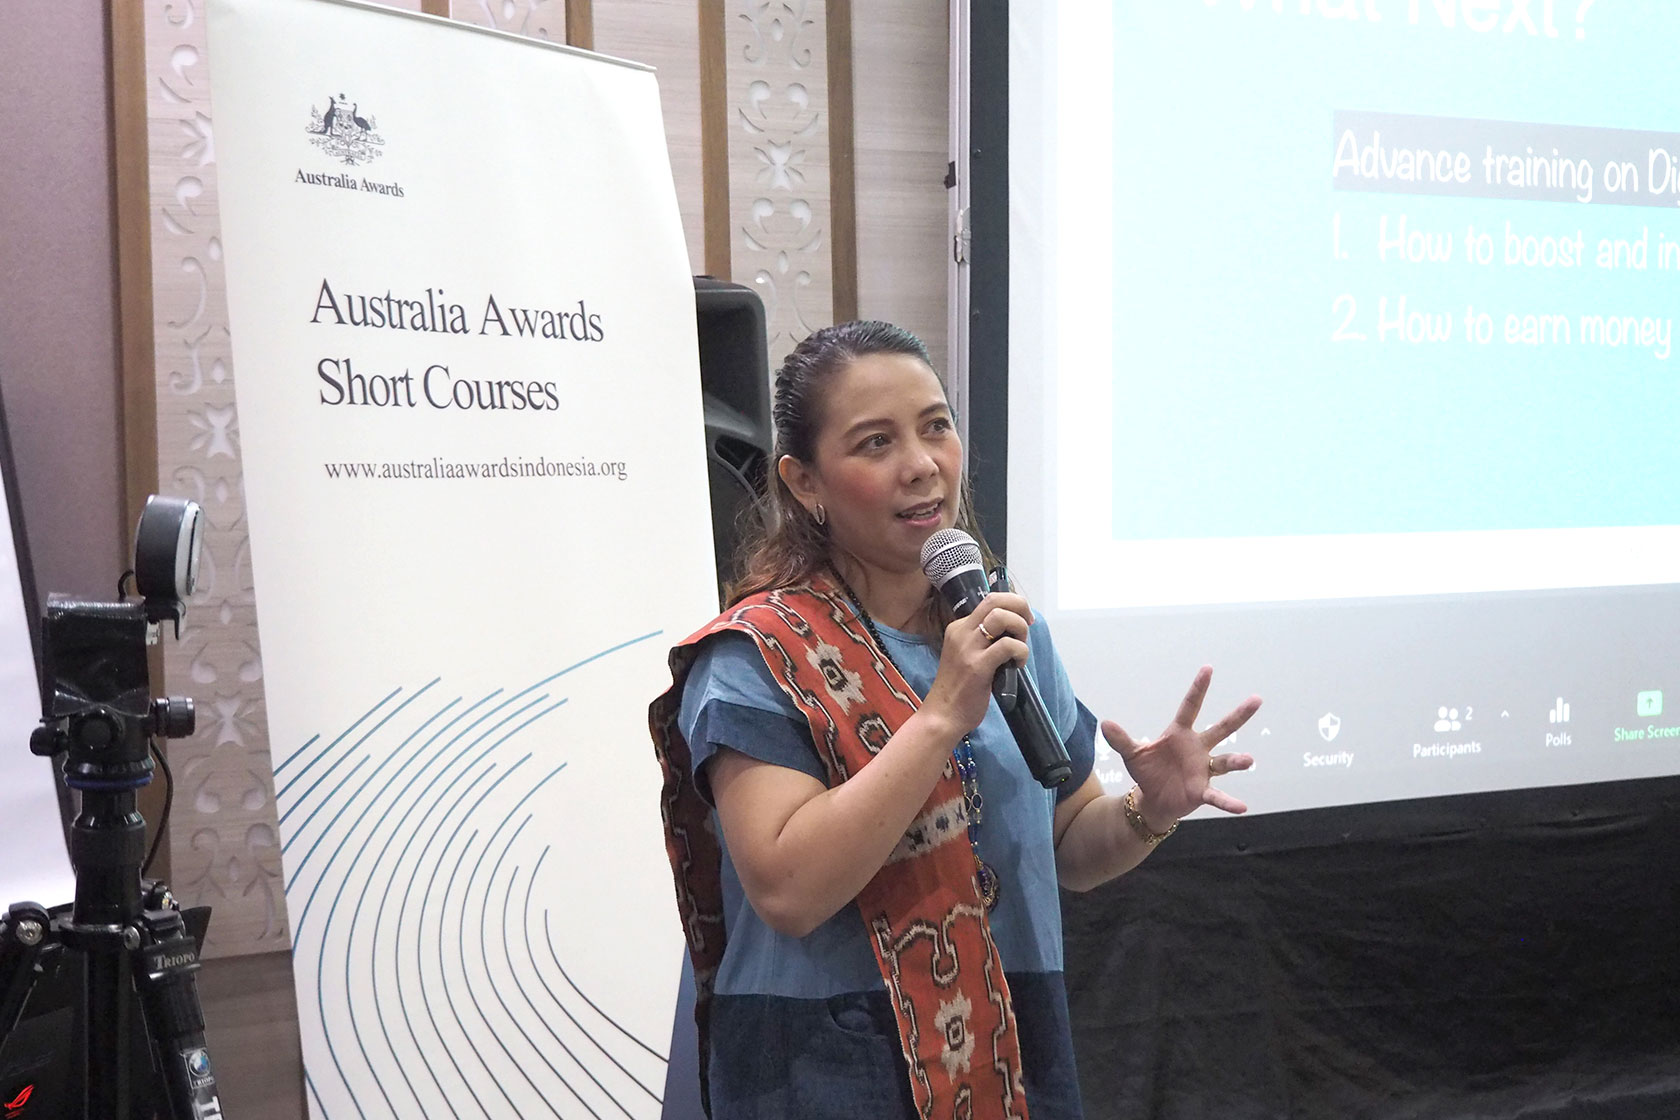 Jennifer Astin Septiana, a participant in the Short Course, shares the insights and thoughts she gained from the program.